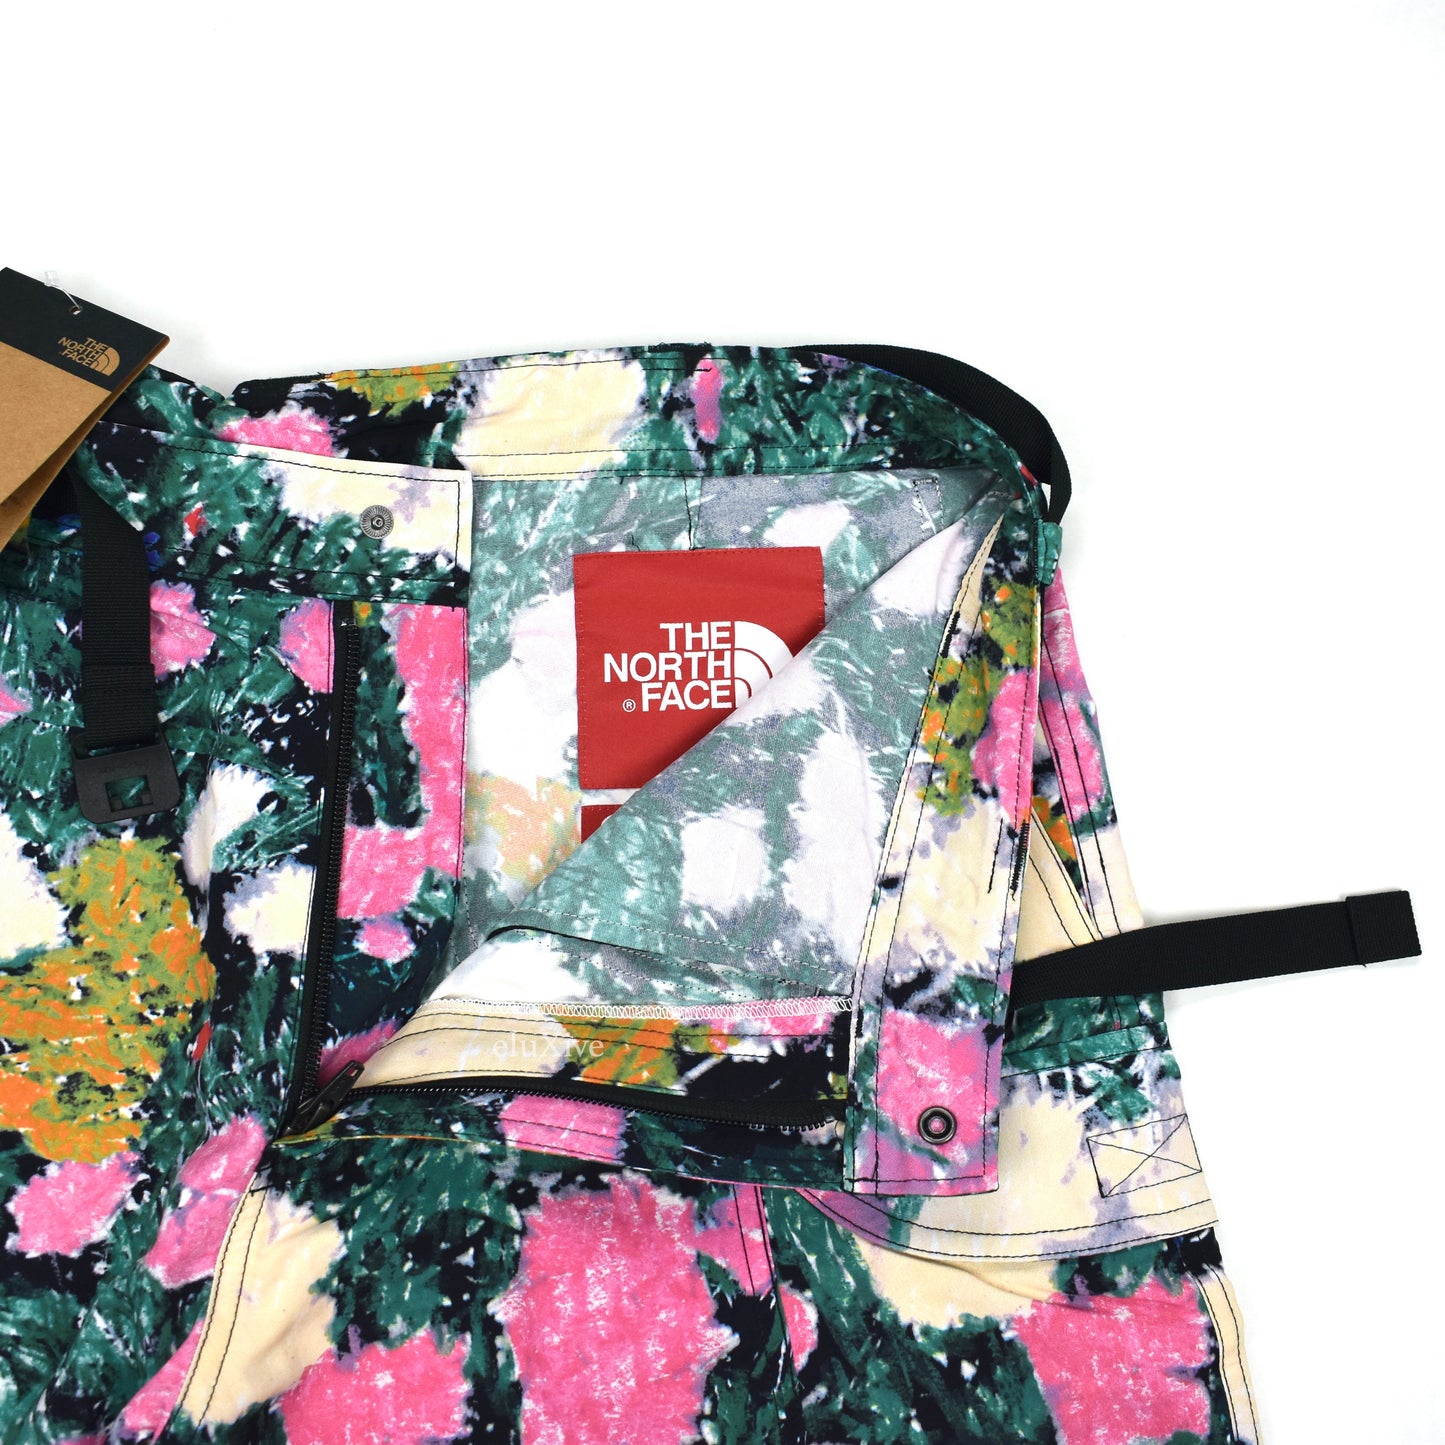 Supreme x The North Face - Flowers Print Trekking Packable Shorts